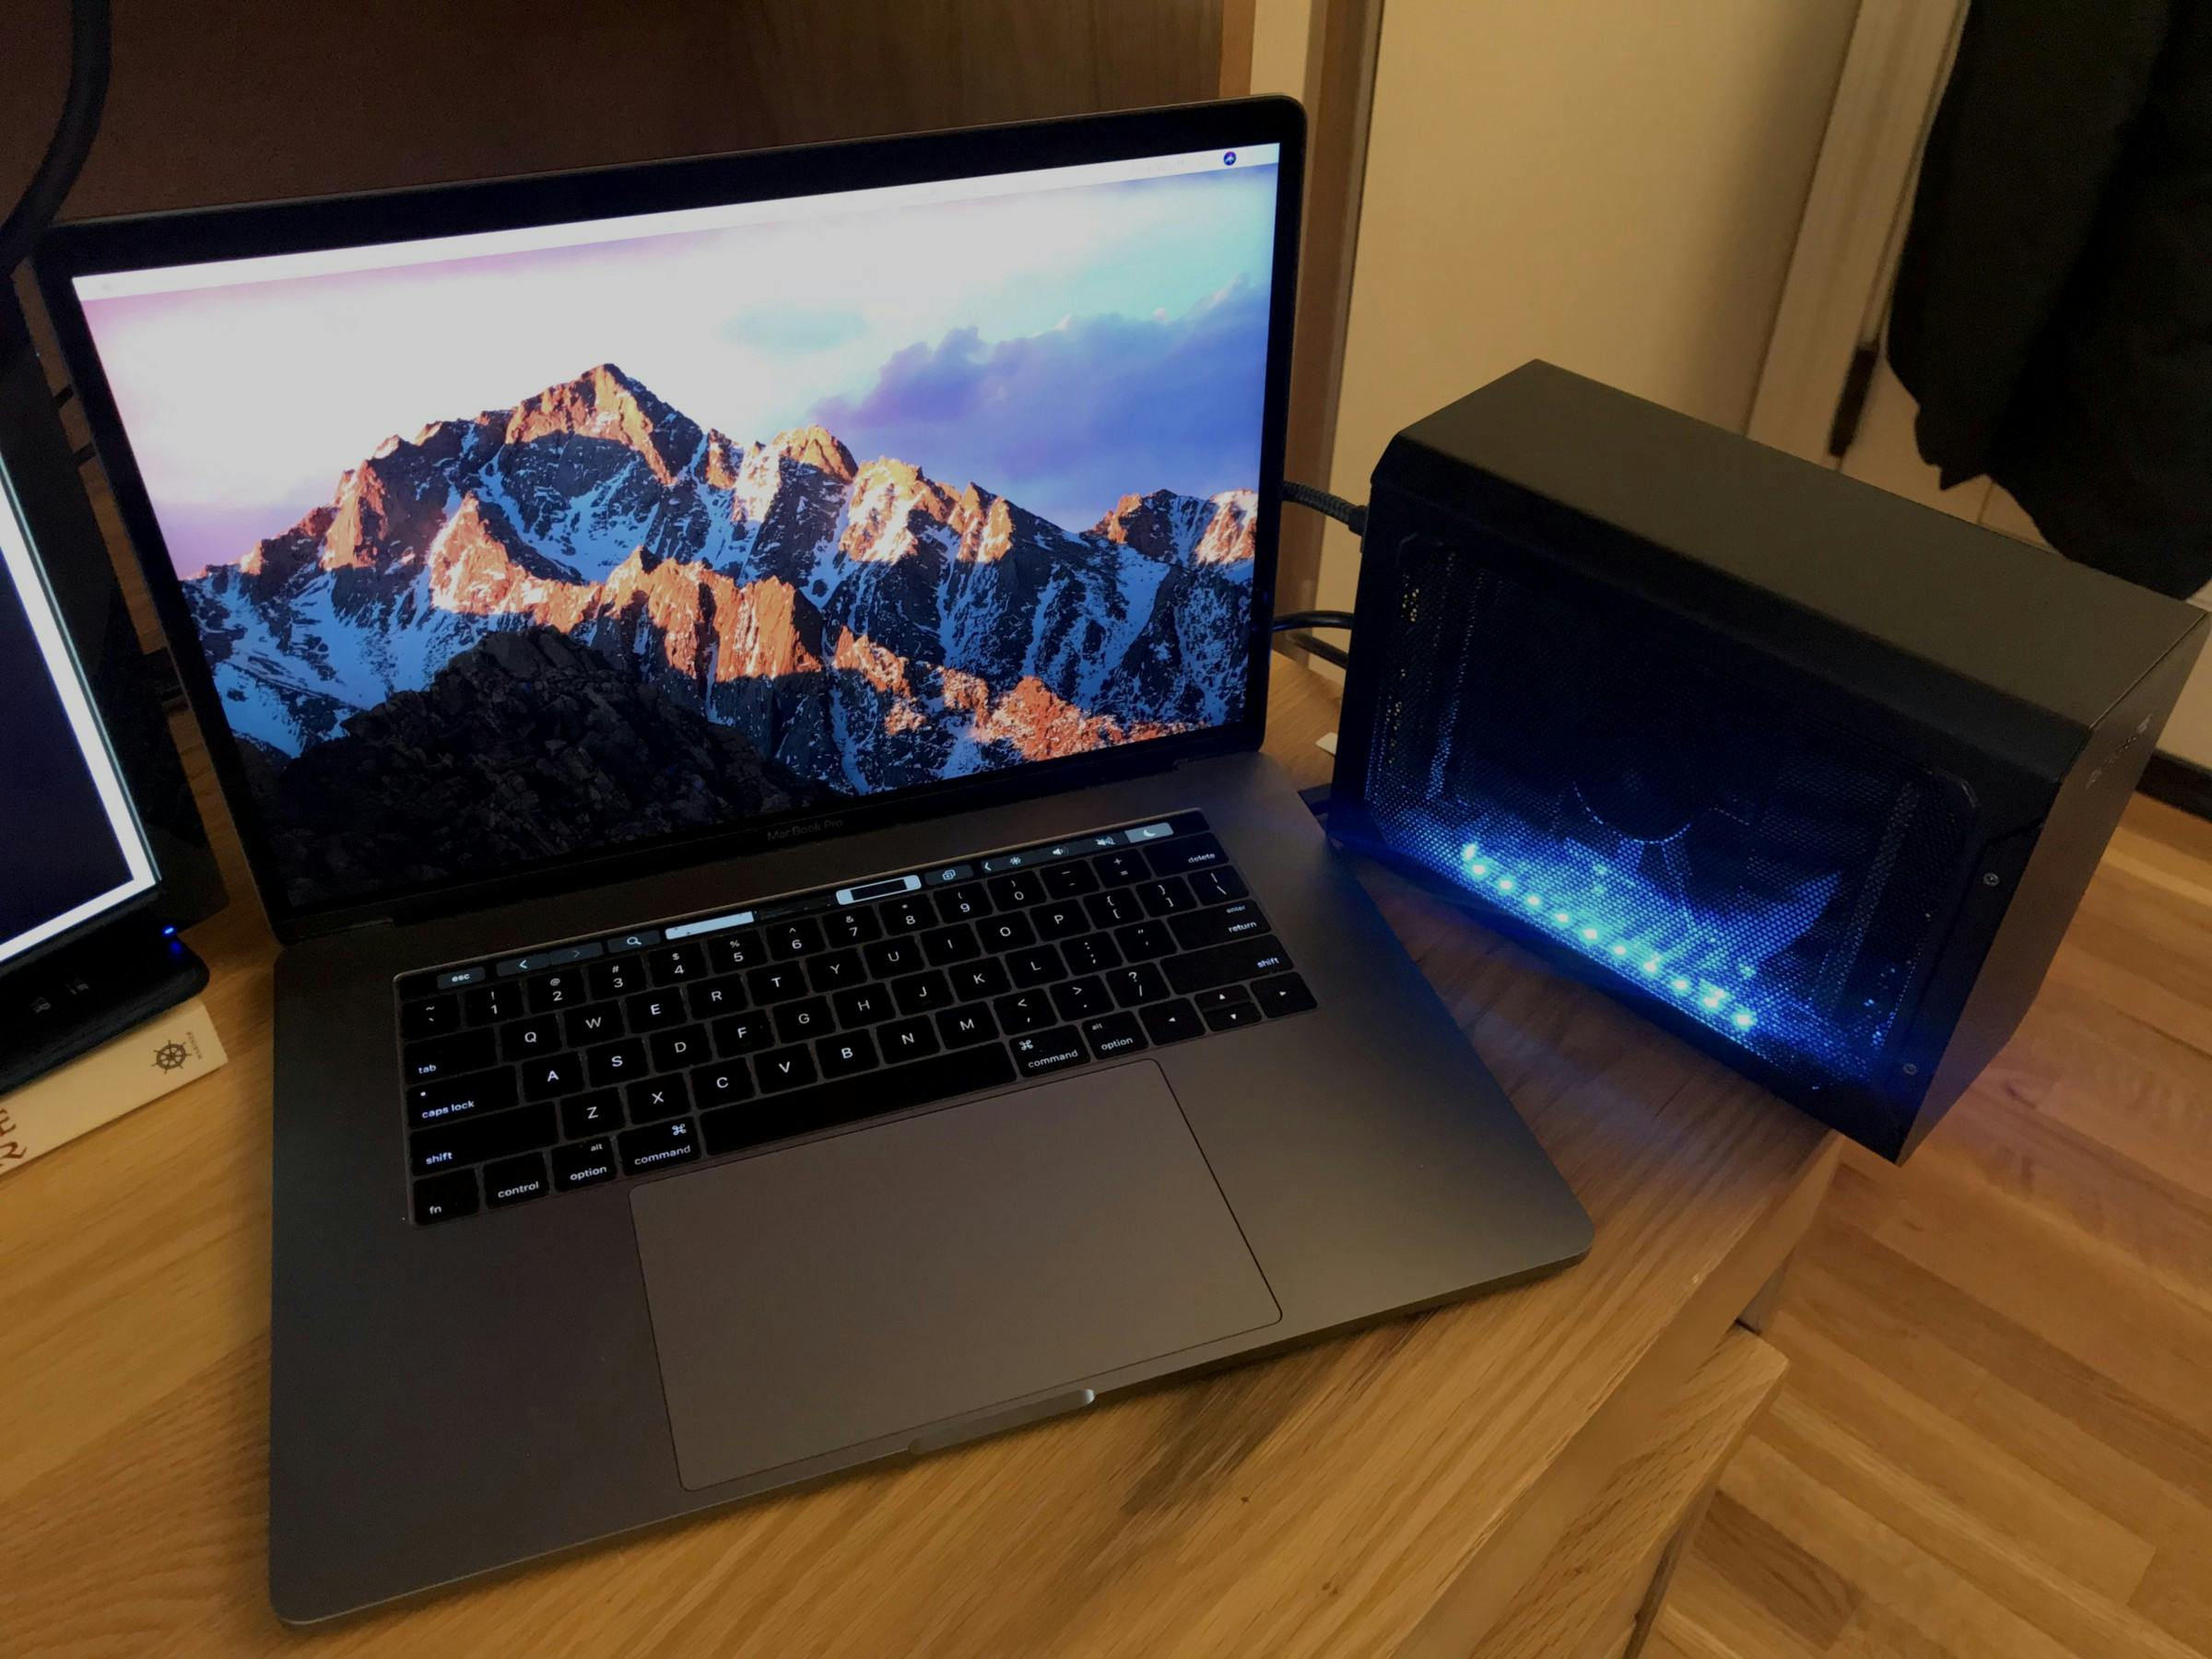 /egpu-with-macos-how-useful-is-one-really-68f7651cba24 feature image